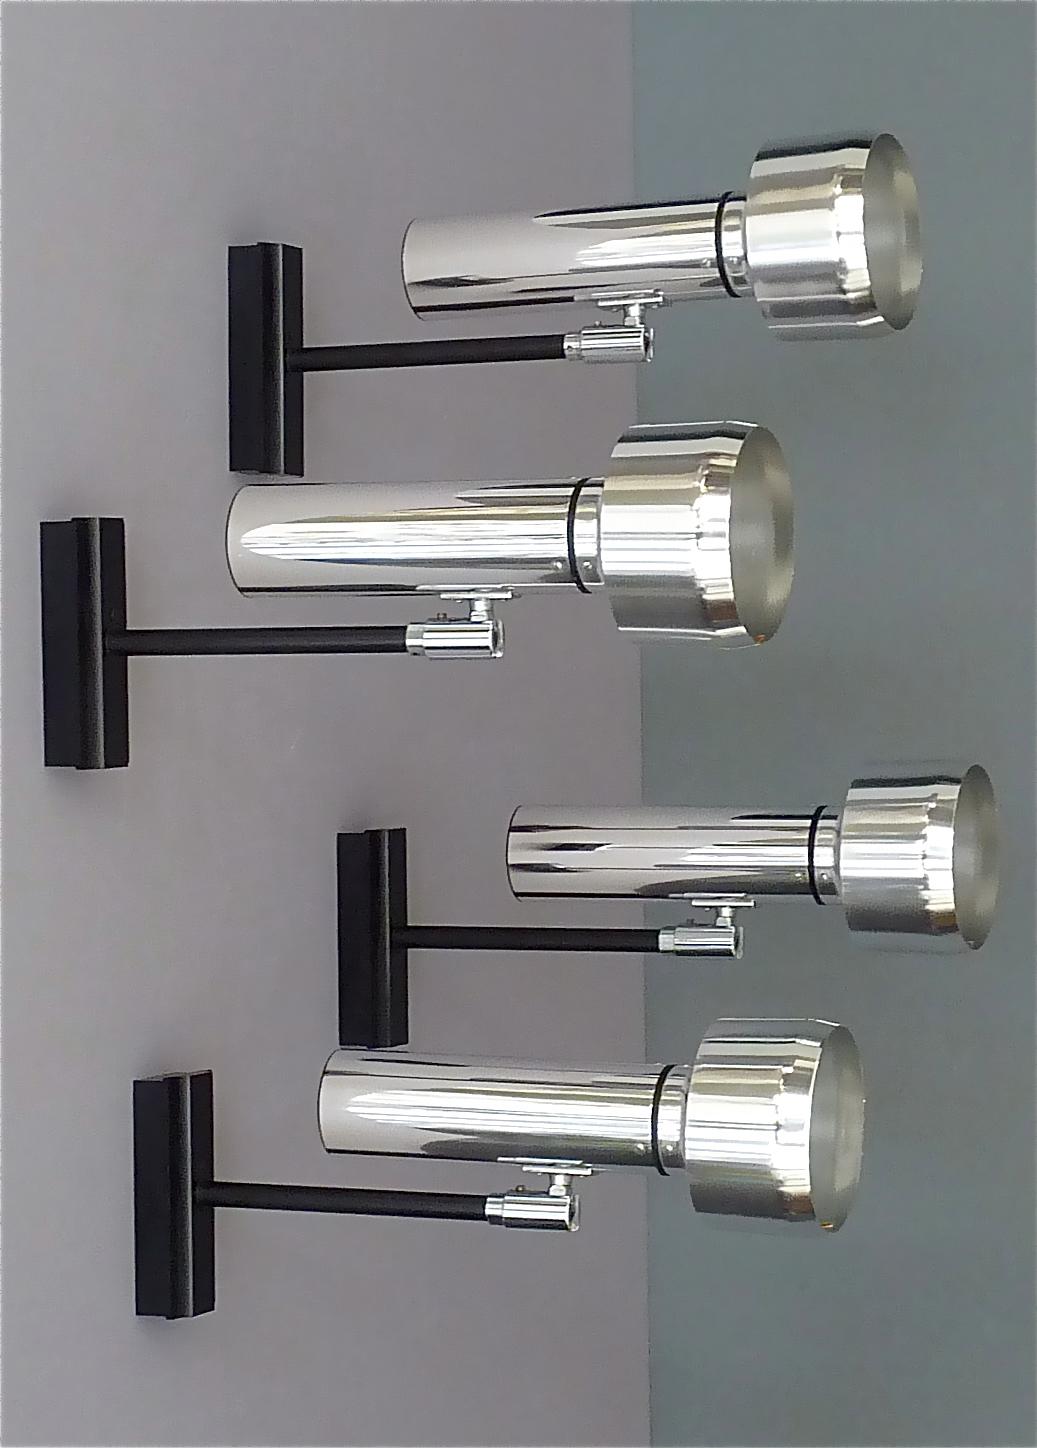 4 Wall Lights Erco Spots Ceiling Lamps Chrome Black Sarfatti Arteluce Style For Sale 8